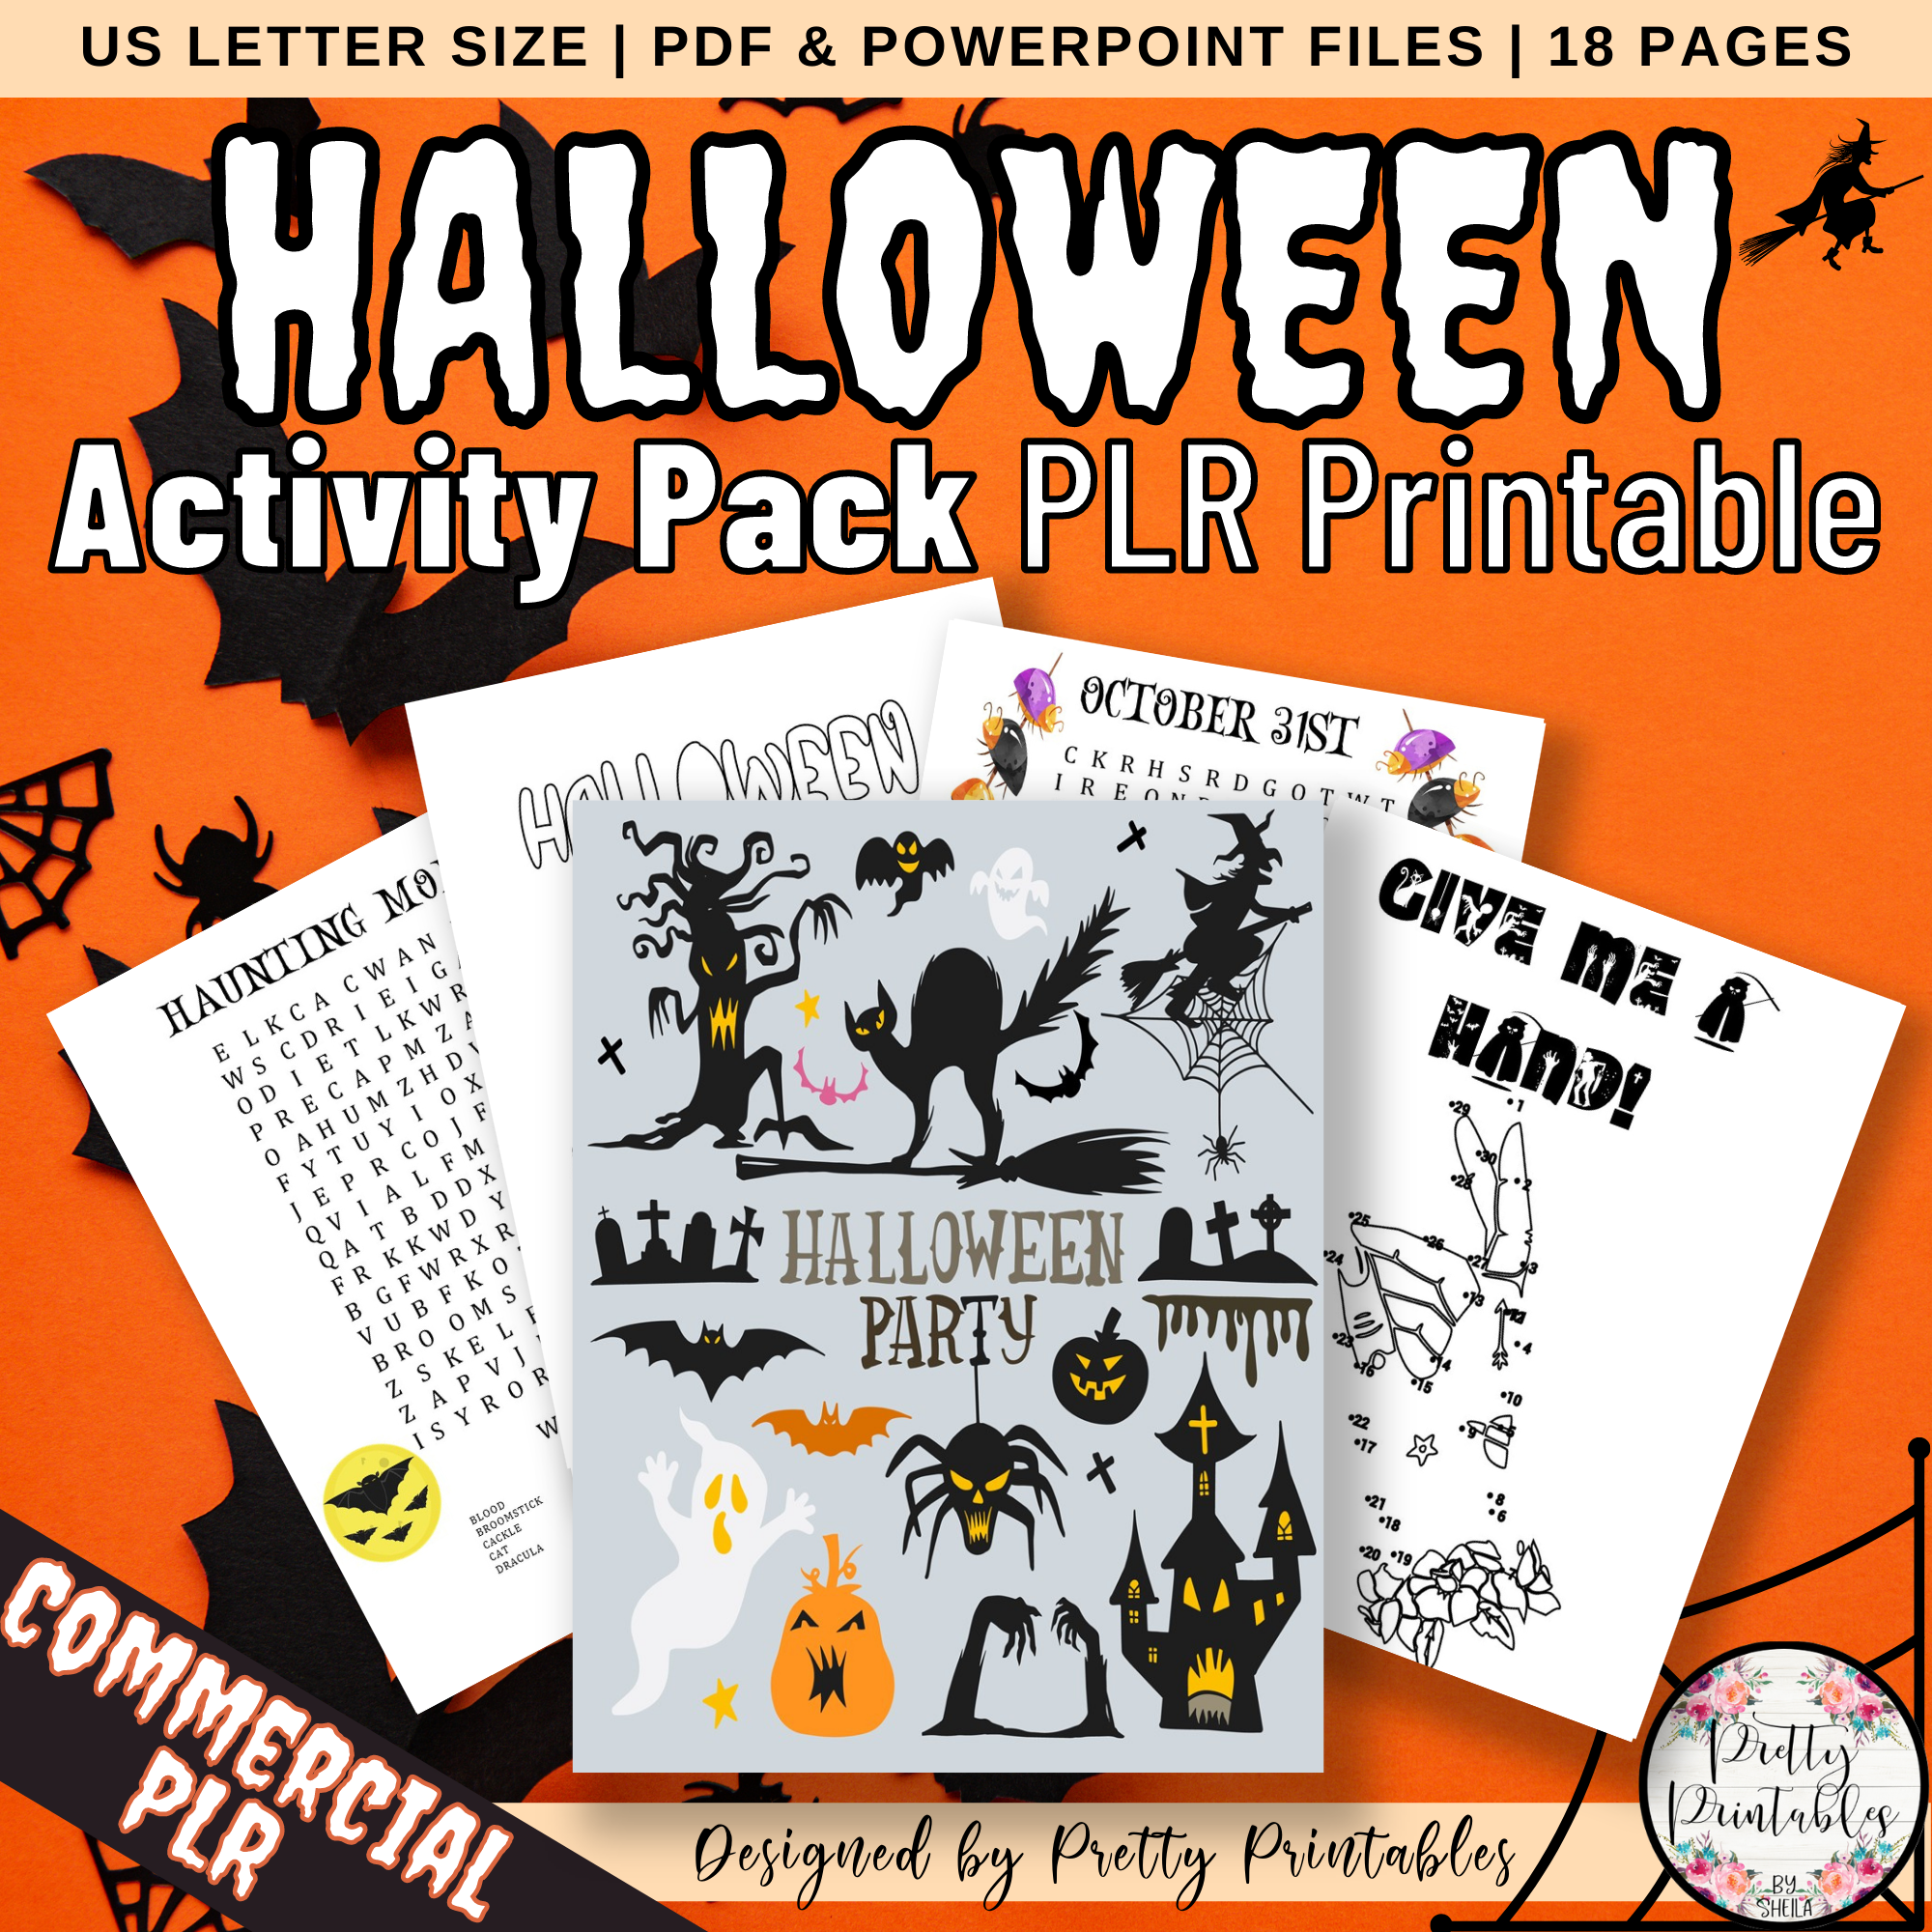 Halloween Party Activity Sheets Commercial PLR